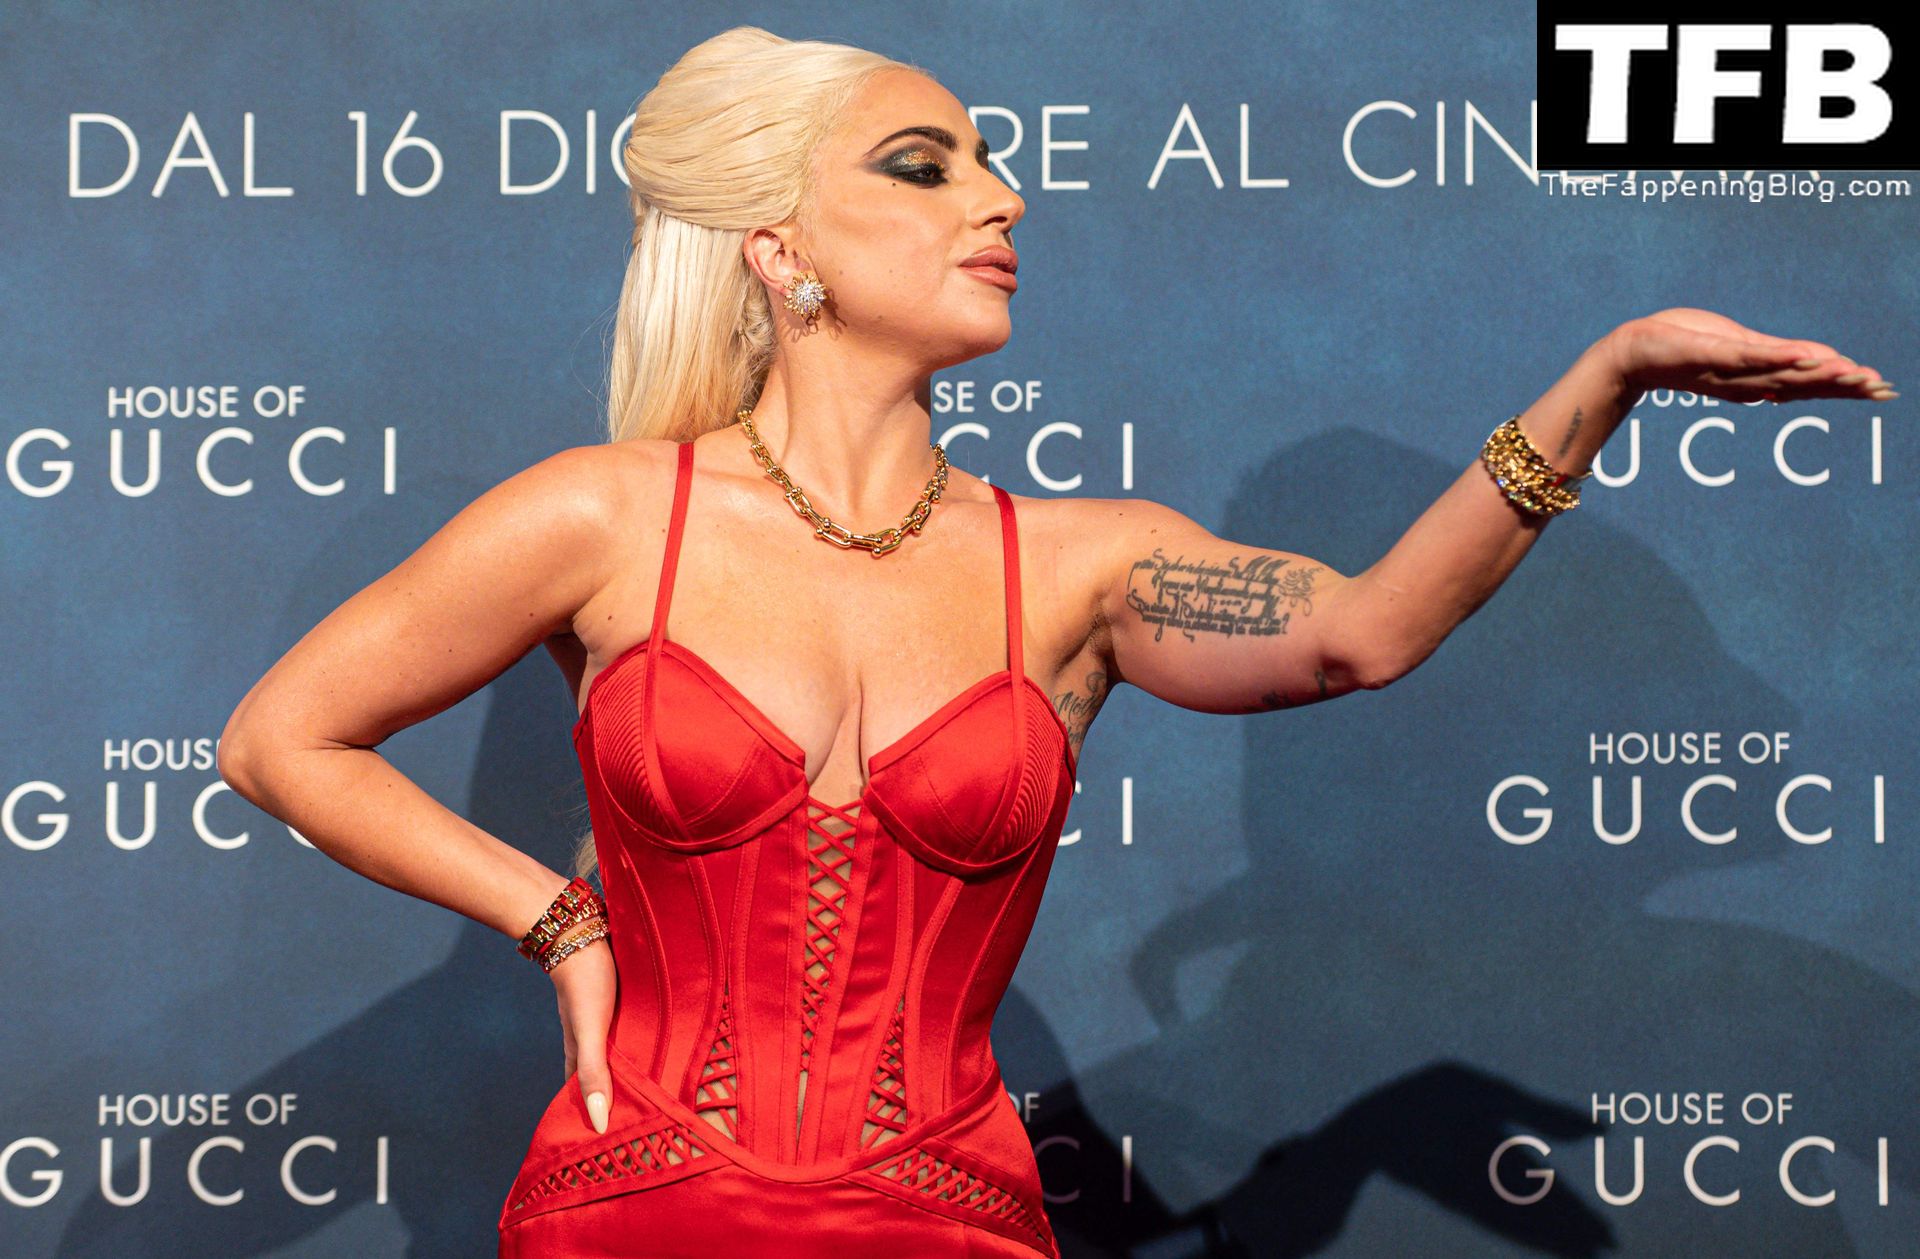 Lady Gaga Shows Off Her Sexy Tits at the Premiere of the Film House of Gucci’ in Milan (9 Photos)